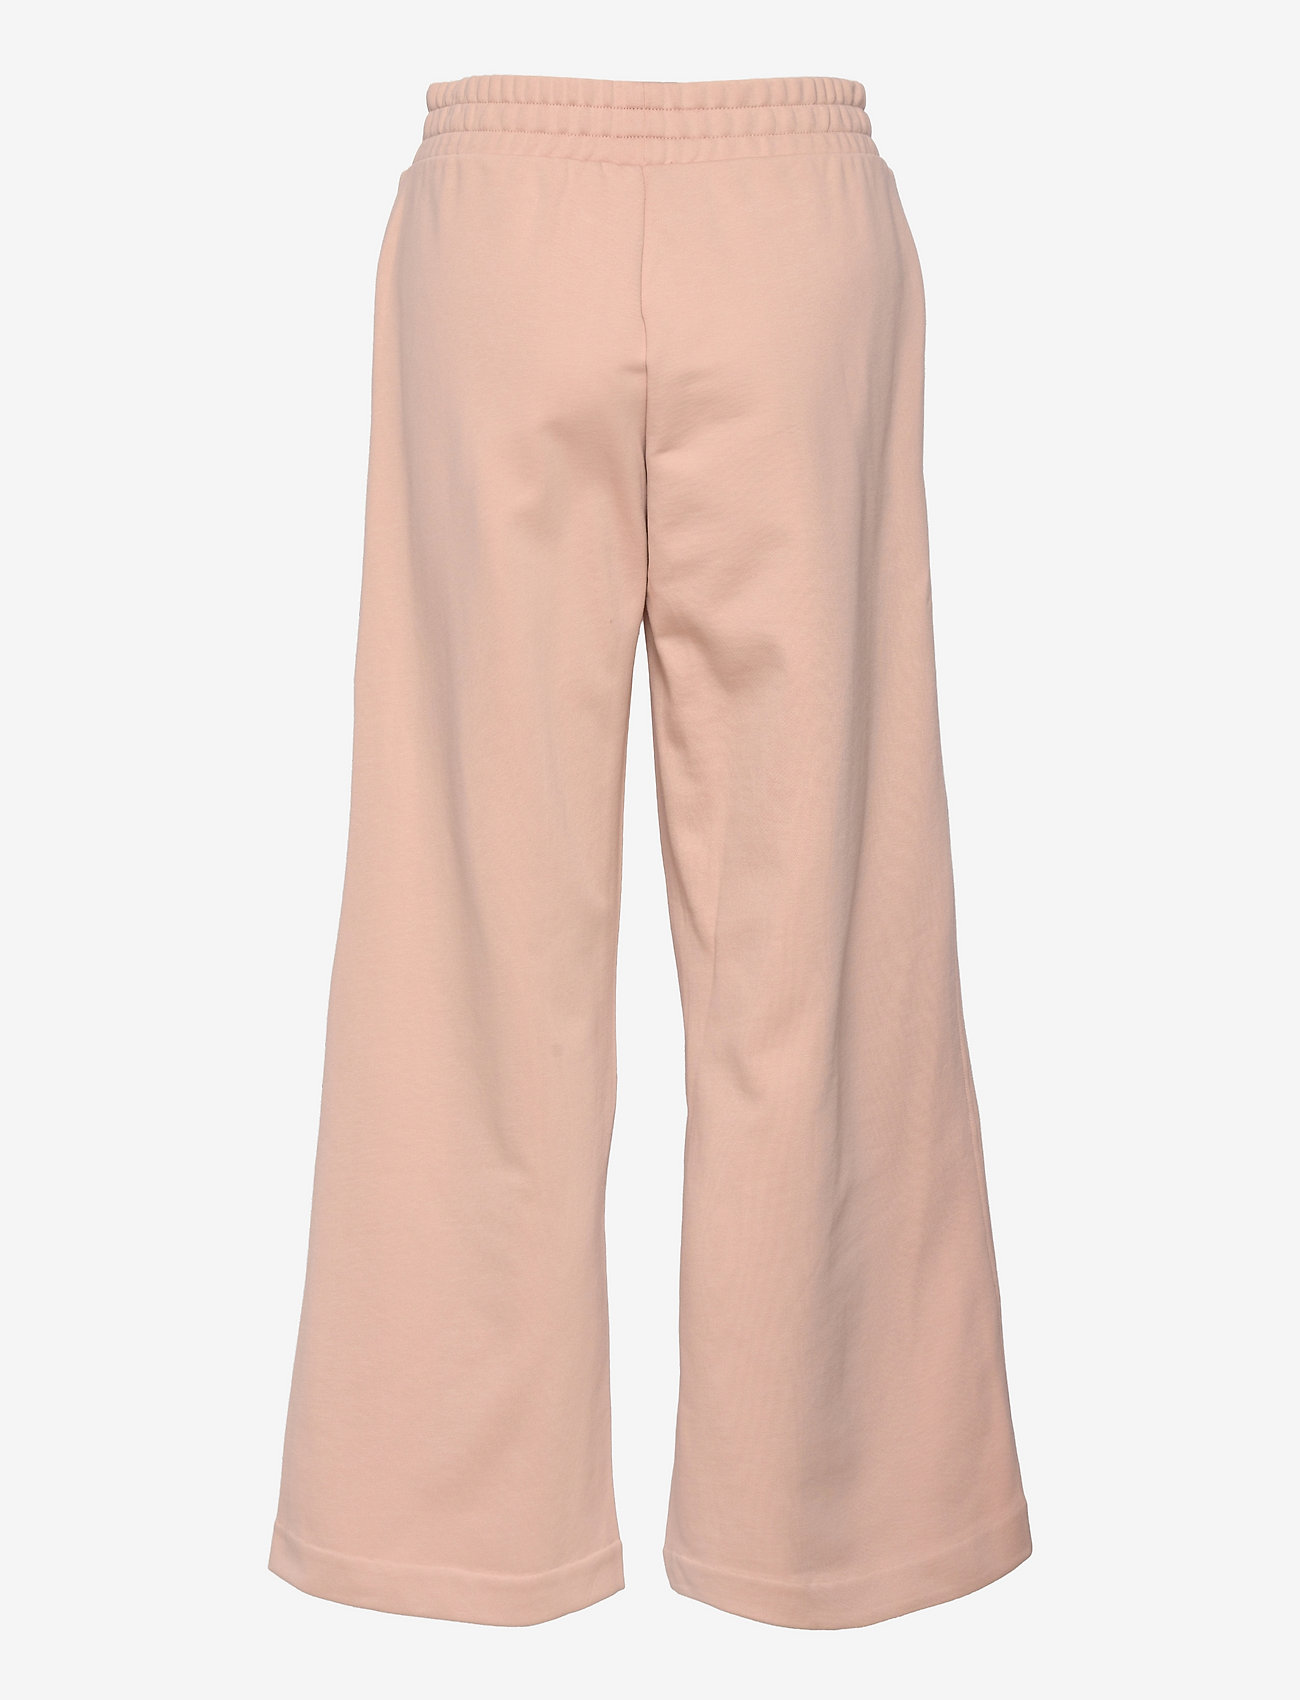 Residus - Rory Wide Sweatpant - rose dust - 1